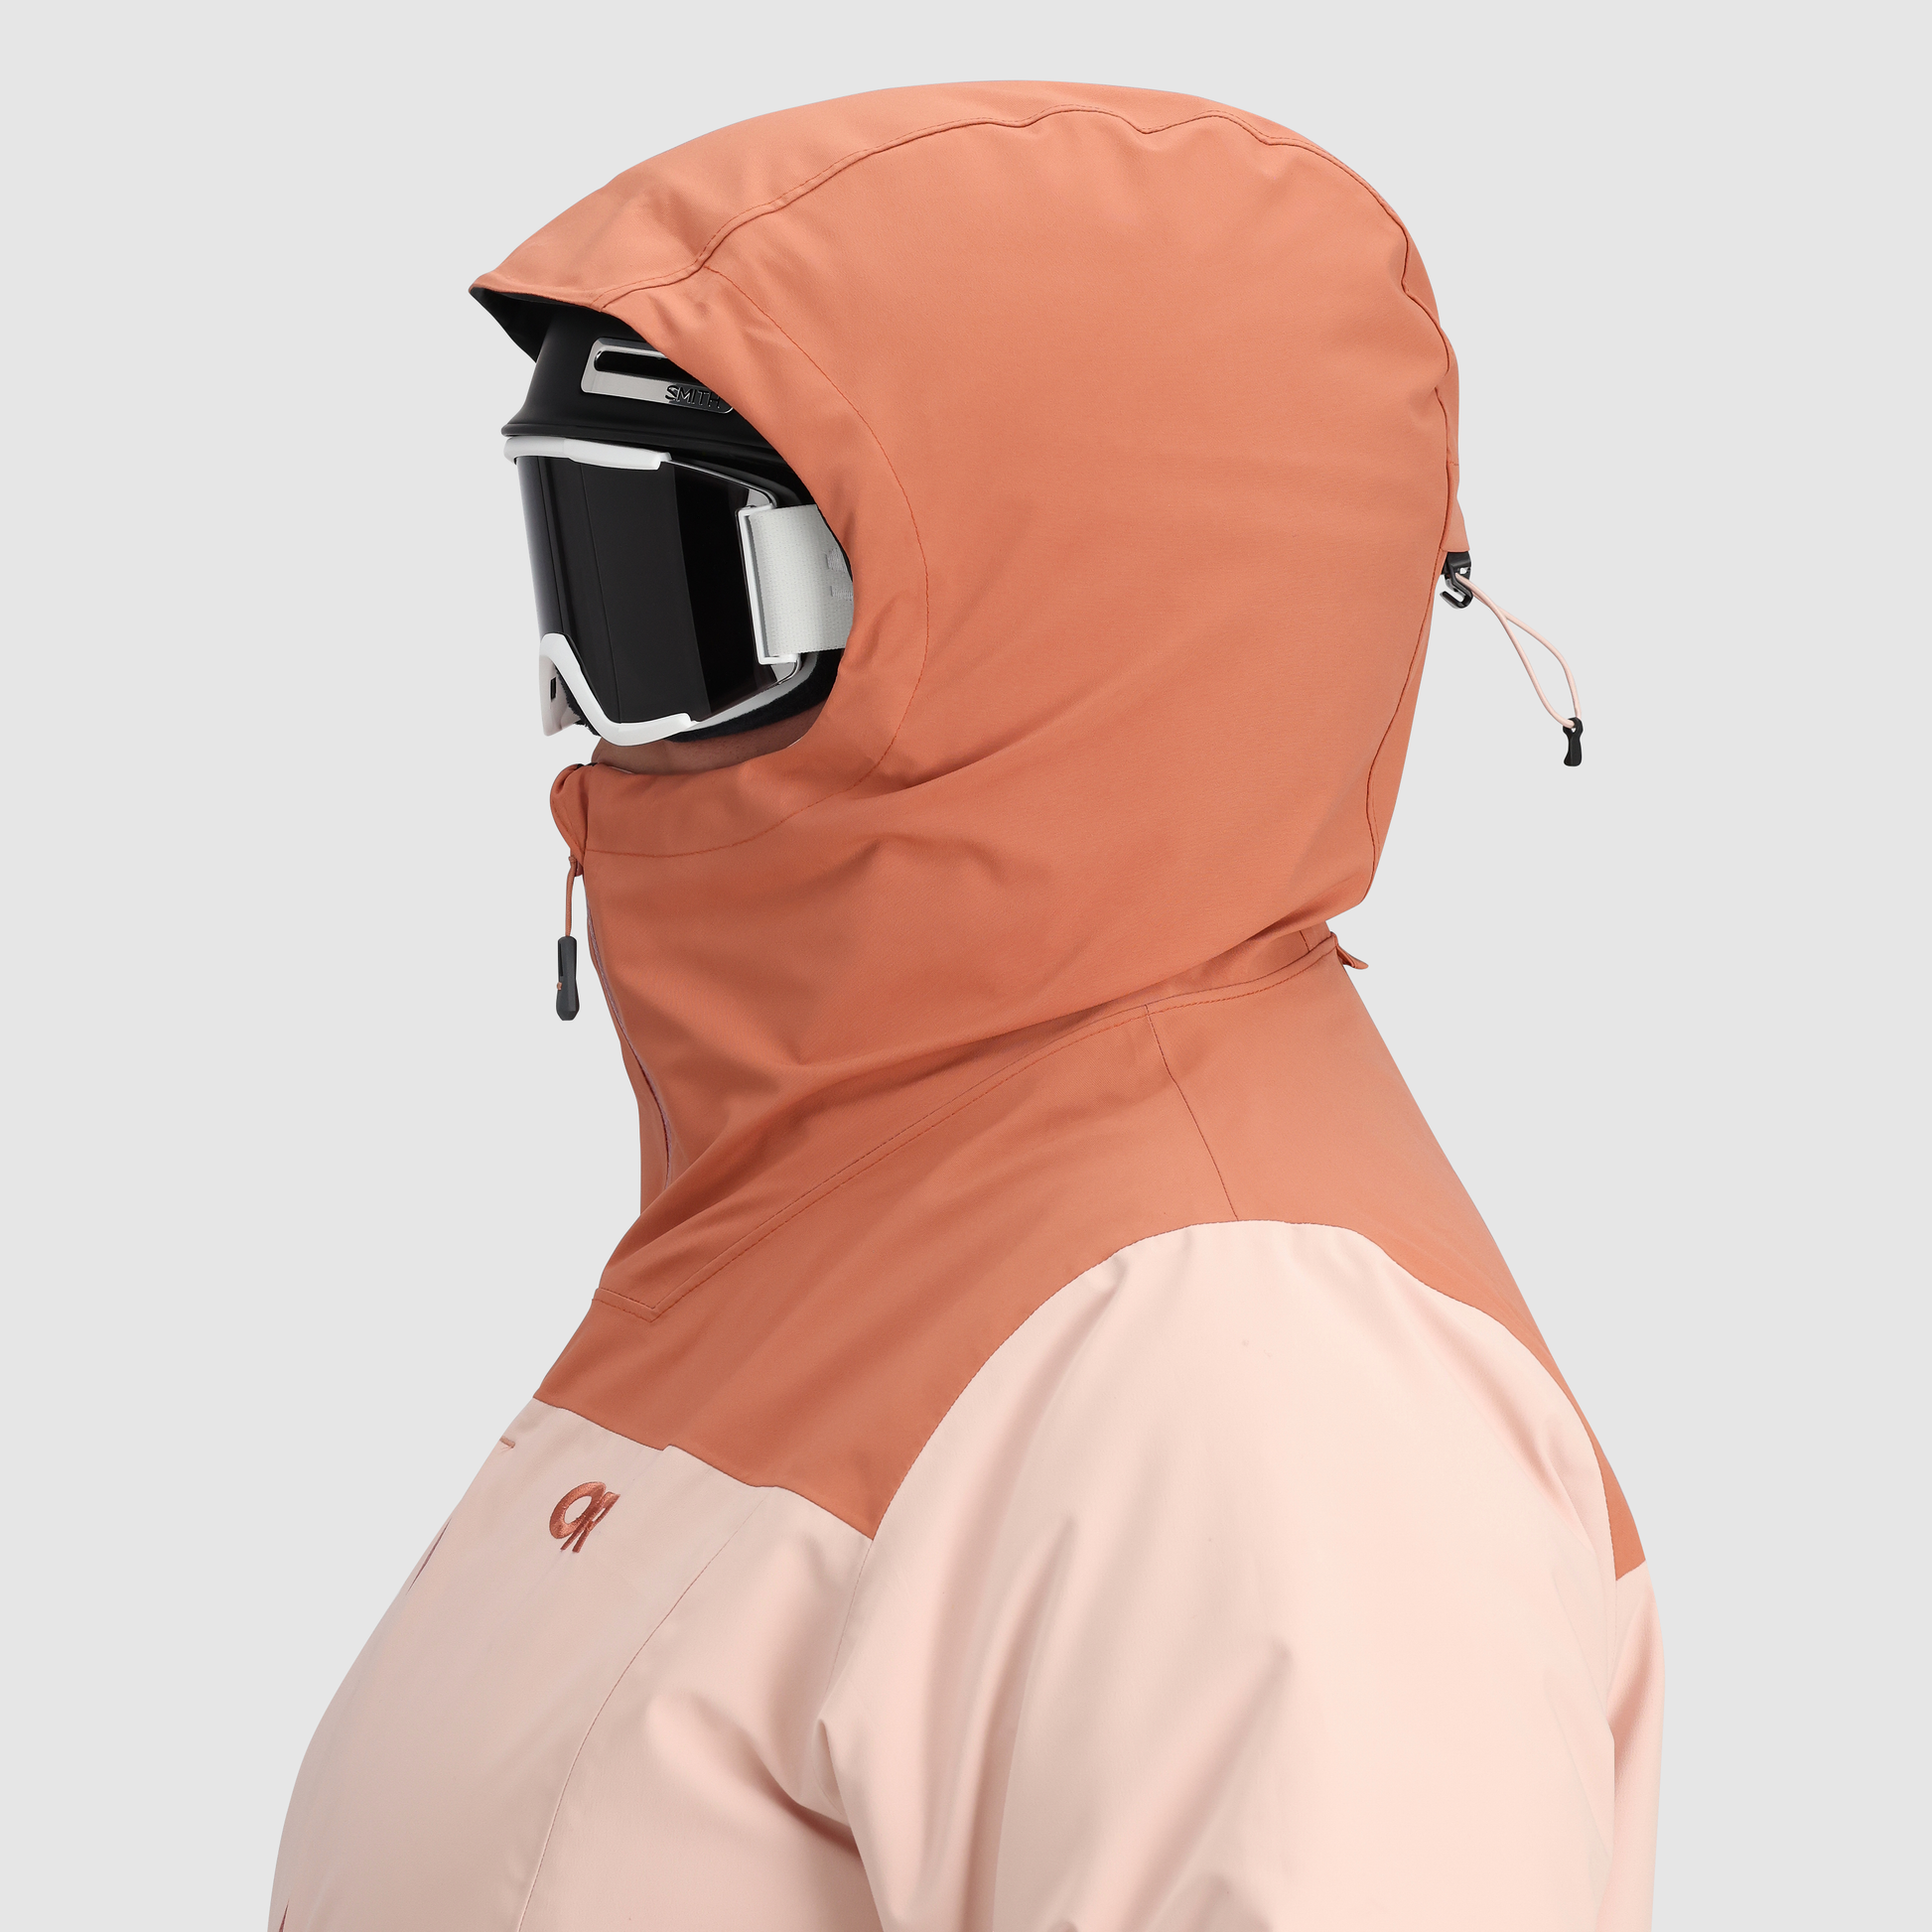 B7 :: Helmet Compatible / This hood is compatible with most helmet sizes, fitting over a skiing, biking, or climbing helmet.